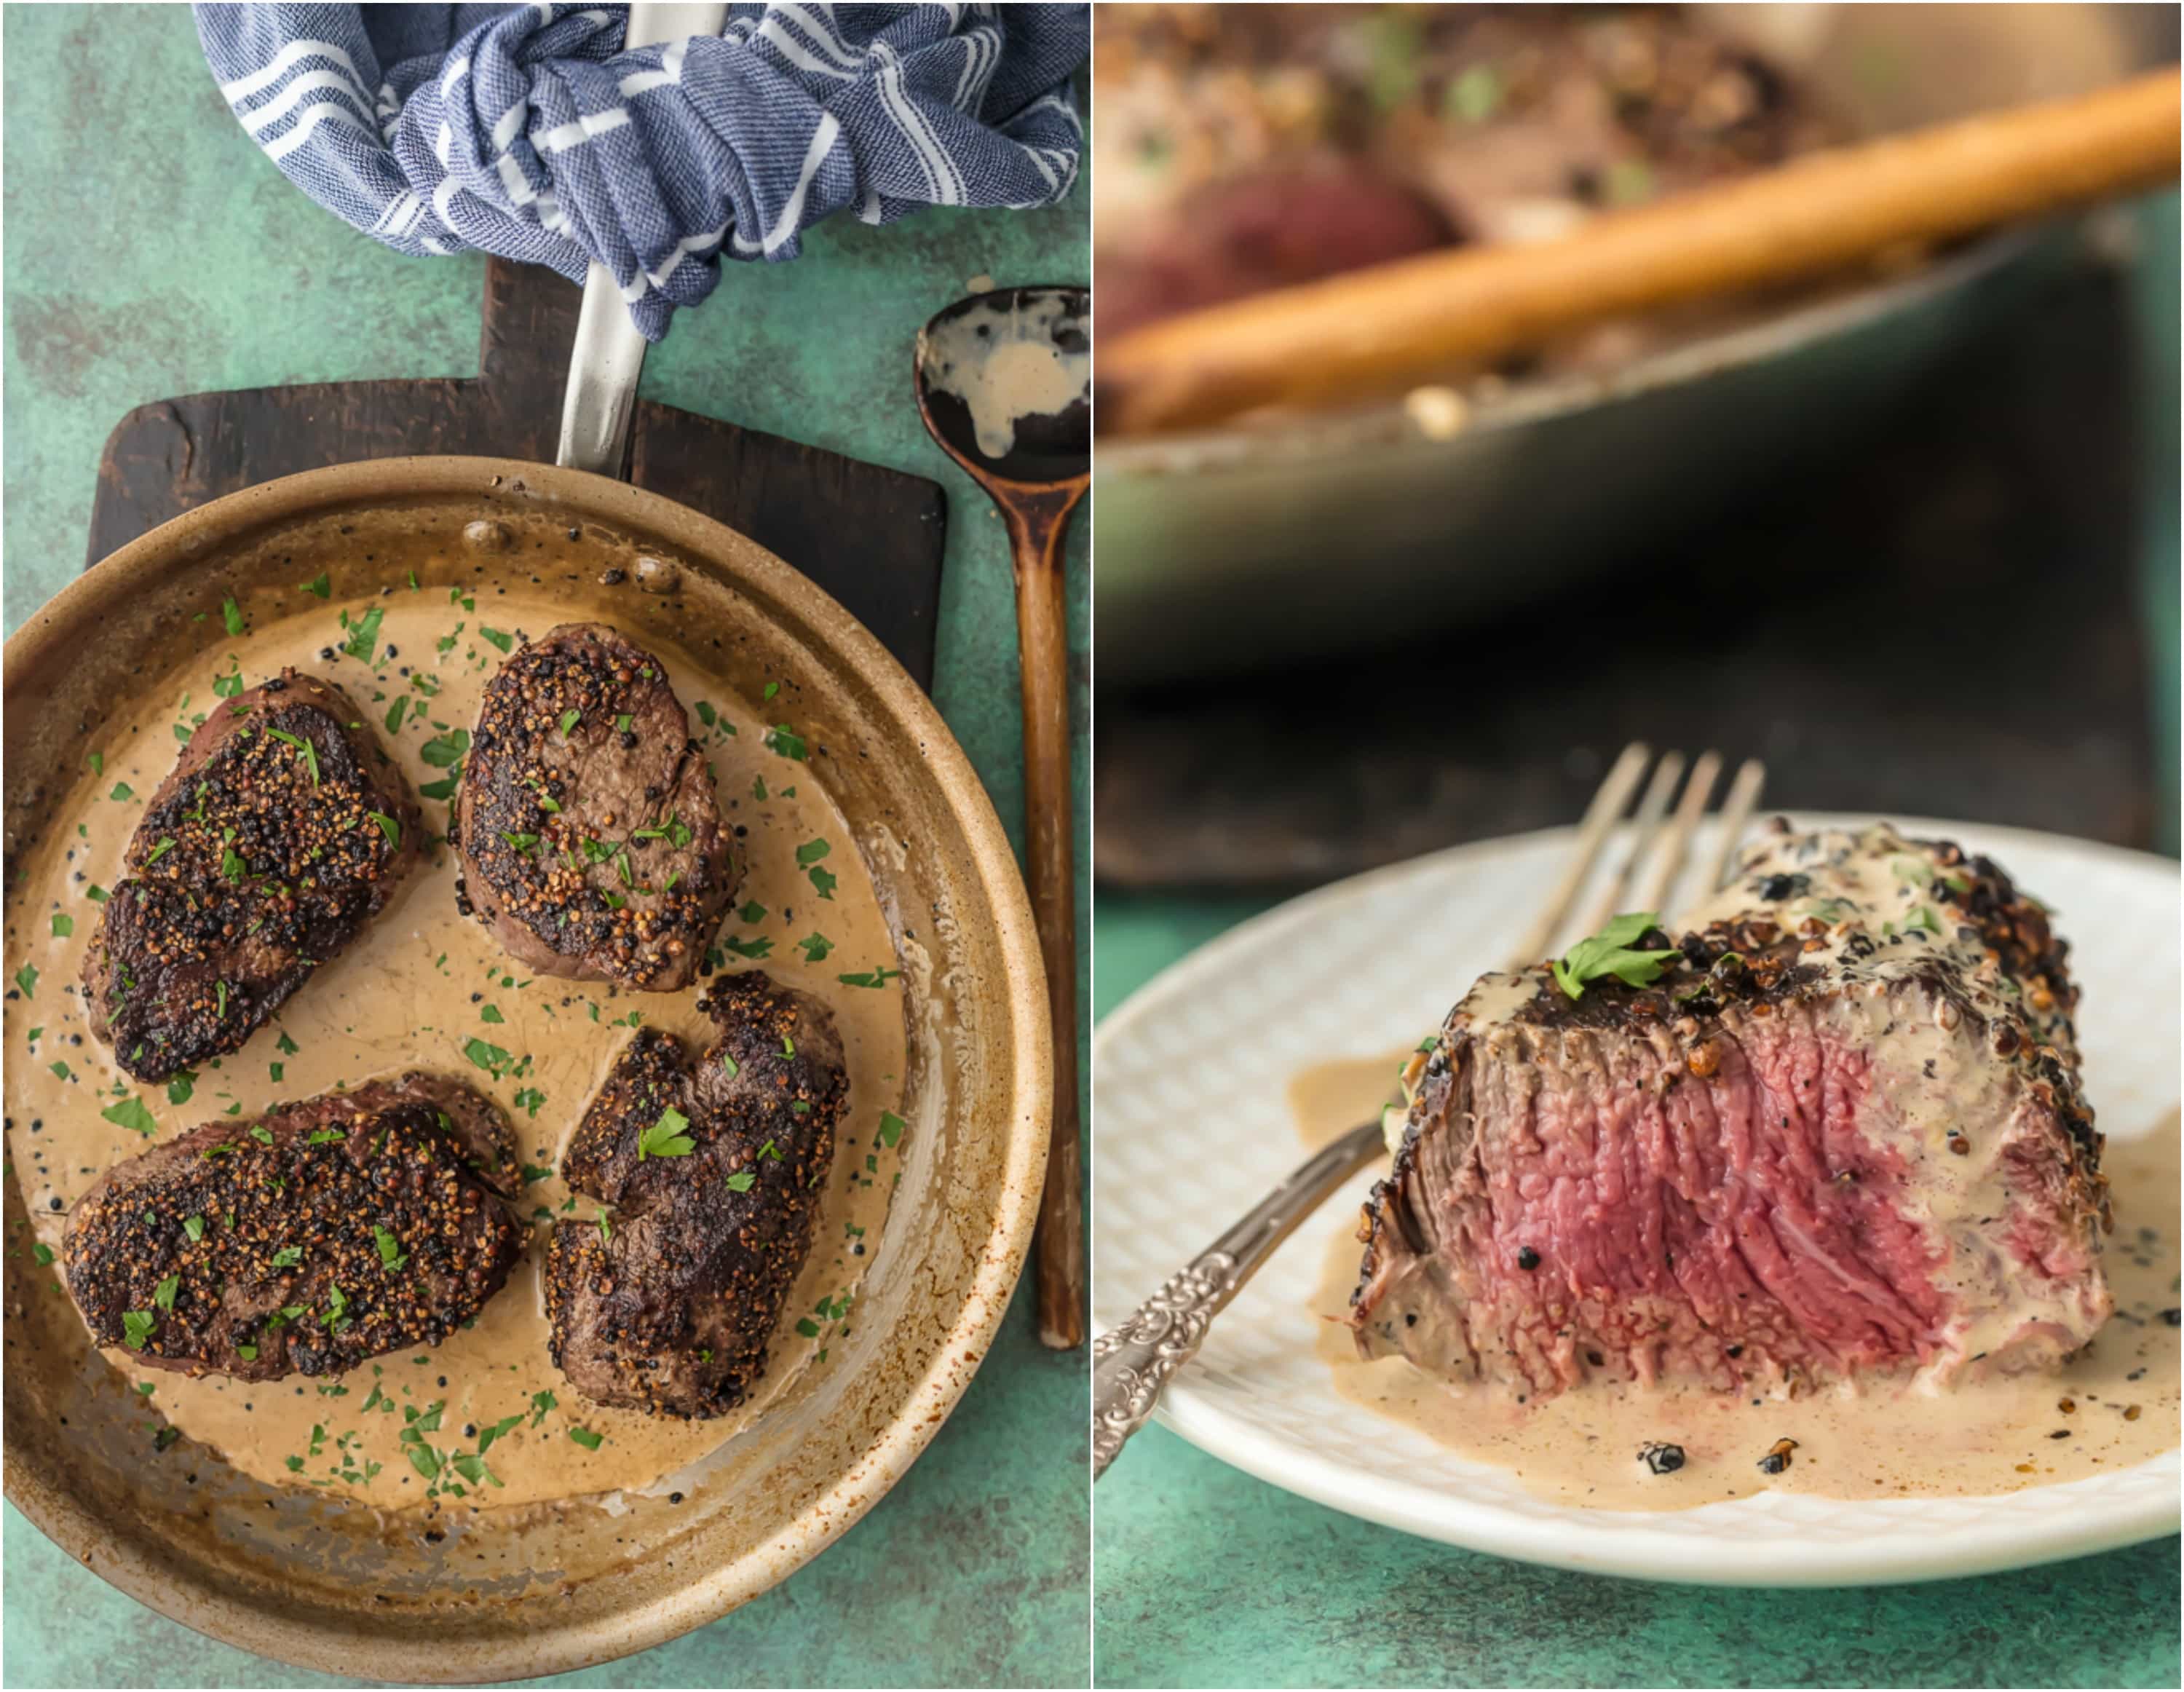 steaks in a skillet and steak on a plate